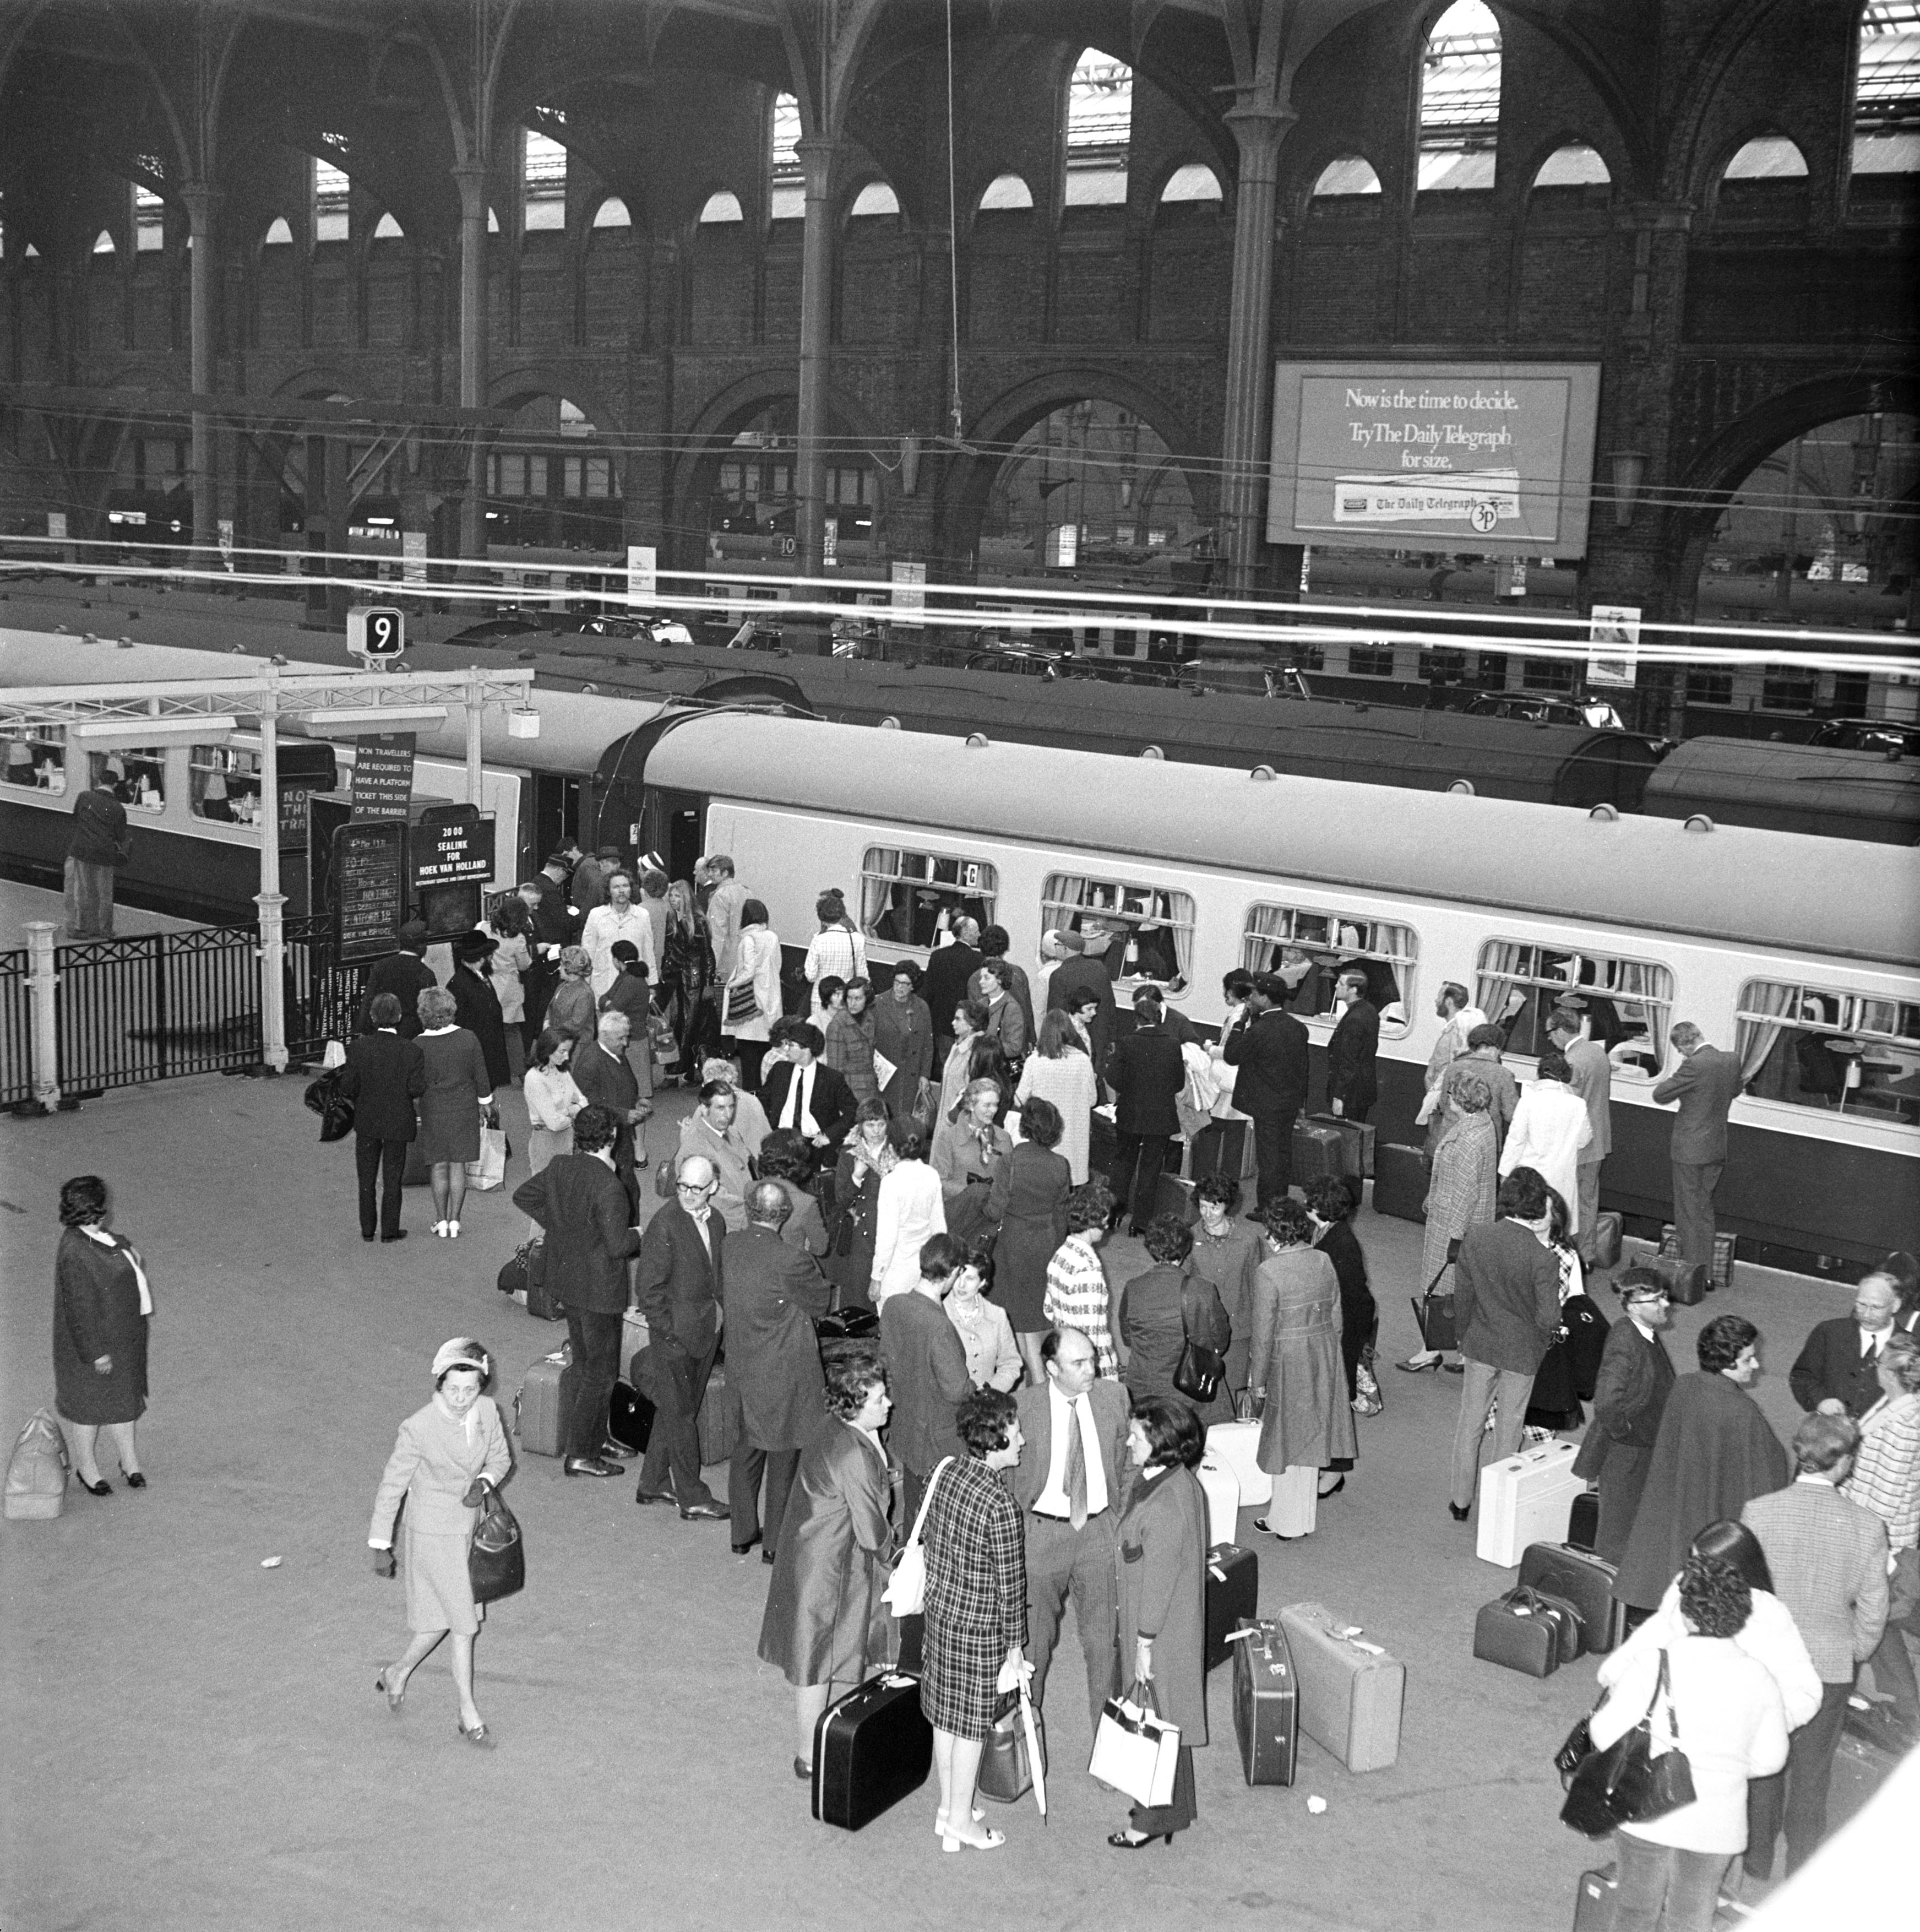 Passengers boarding the 'Hook continental' train at Liverpool Street station, London.